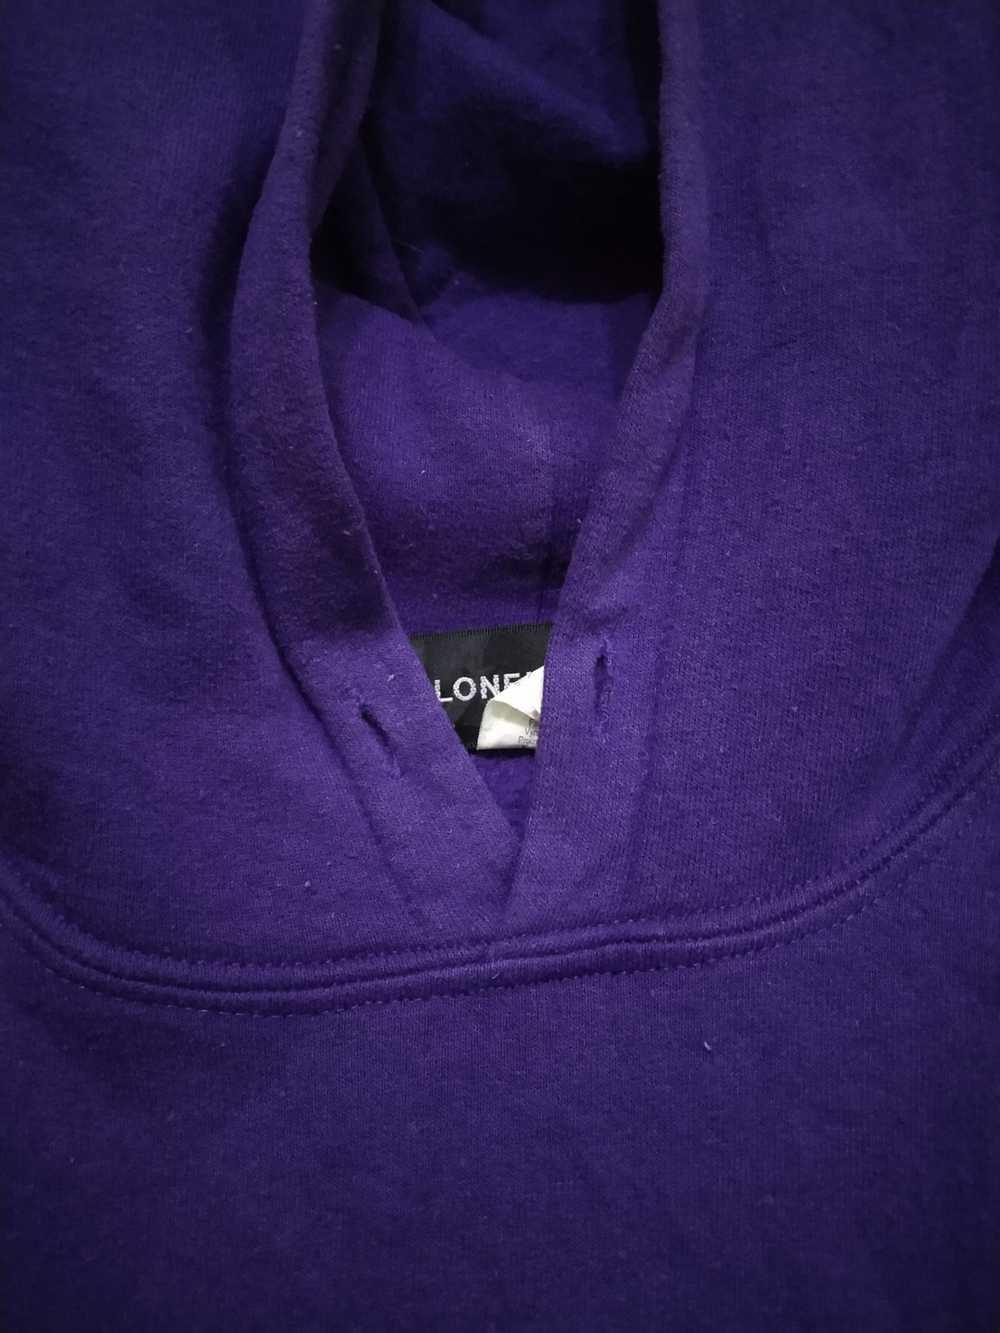 Japanese Brand Lonely Hoodie - image 7